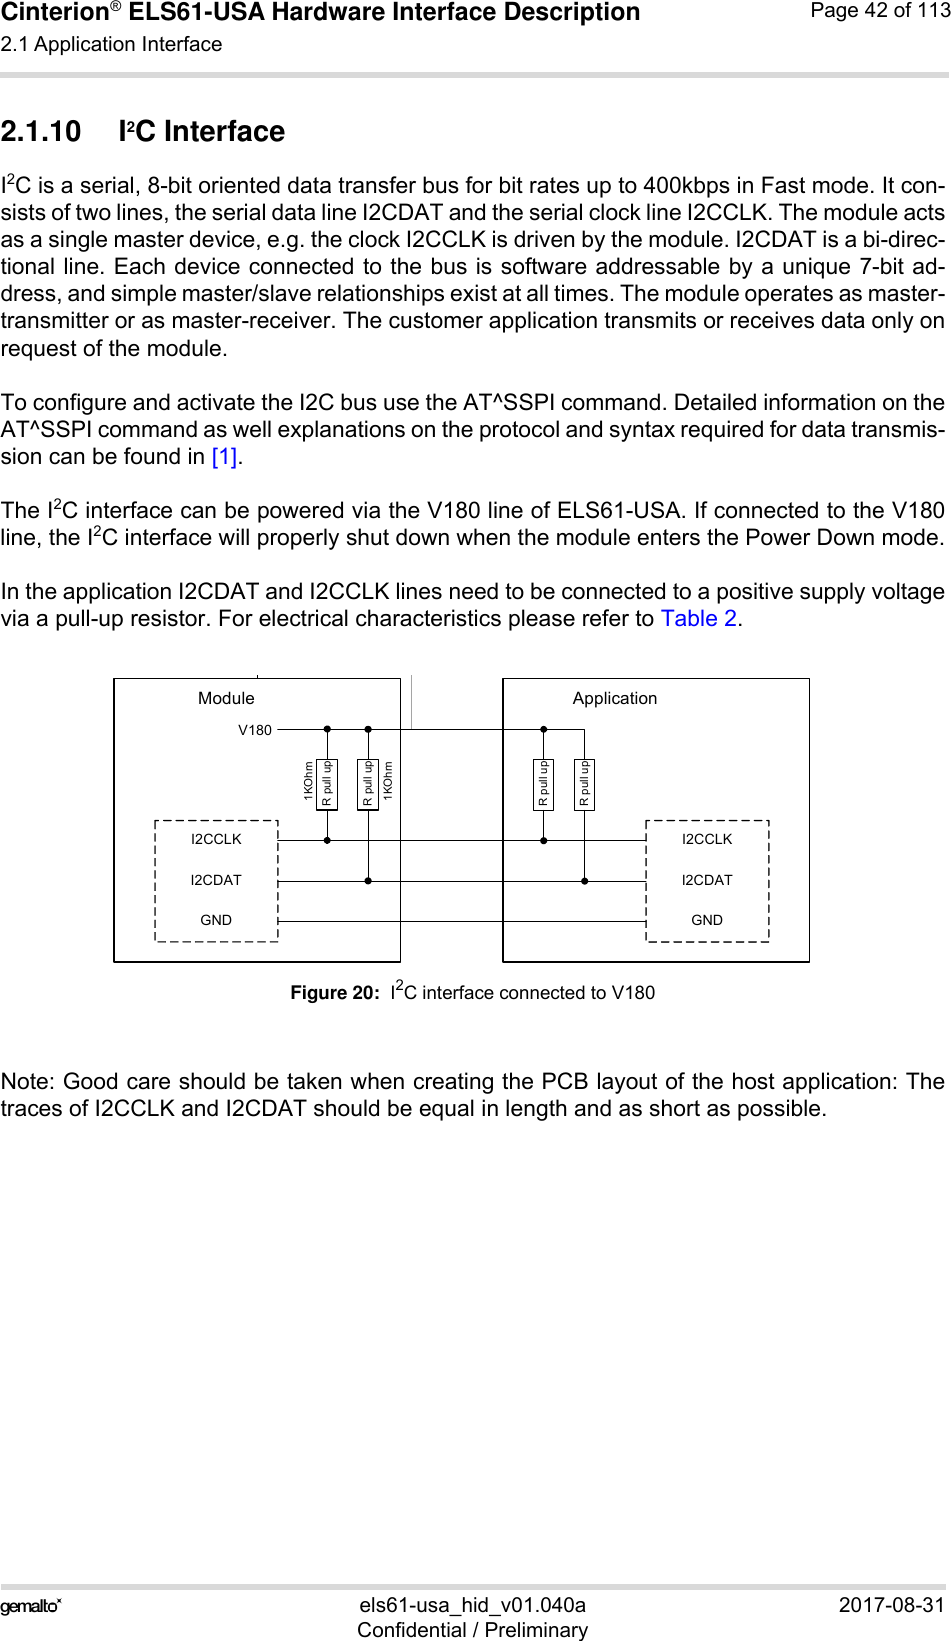 Cinterion® ELS61-USA Hardware Interface Description2.1 Application Interface59els61-usa_hid_v01.040a 2017-08-31Confidential / PreliminaryPage 42 of 1132.1.10 I2C InterfaceI2C is a serial, 8-bit oriented data transfer bus for bit rates up to 400kbps in Fast mode. It con-sists of two lines, the serial data line I2CDAT and the serial clock line I2CCLK. The module actsas a single master device, e.g. the clock I2CCLK is driven by the module. I2CDAT is a bi-direc-tional line. Each device connected to the bus is software addressable by a unique 7-bit ad-dress, and simple master/slave relationships exist at all times. The module operates as master-transmitter or as master-receiver. The customer application transmits or receives data only onrequest of the module.To configure and activate the I2C bus use the AT^SSPI command. Detailed information on theAT^SSPI command as well explanations on the protocol and syntax required for data transmis-sion can be found in [1].The I2C interface can be powered via the V180 line of ELS61-USA. If connected to the V180line, the I2C interface will properly shut down when the module enters the Power Down mode.In the application I2CDAT and I2CCLK lines need to be connected to a positive supply voltagevia a pull-up resistor. For electrical characteristics please refer to Table 2.Figure 20:  I2C interface connected to V180Note: Good care should be taken when creating the PCB layout of the host application: Thetraces of I2CCLK and I2CDAT should be equal in length and as short as possible.I2CCLKI2CDATGNDI2CCLKI2CDATGNDModule ApplicationV180R pull upR pull upR pull upR pull up1KOhm1KOhm